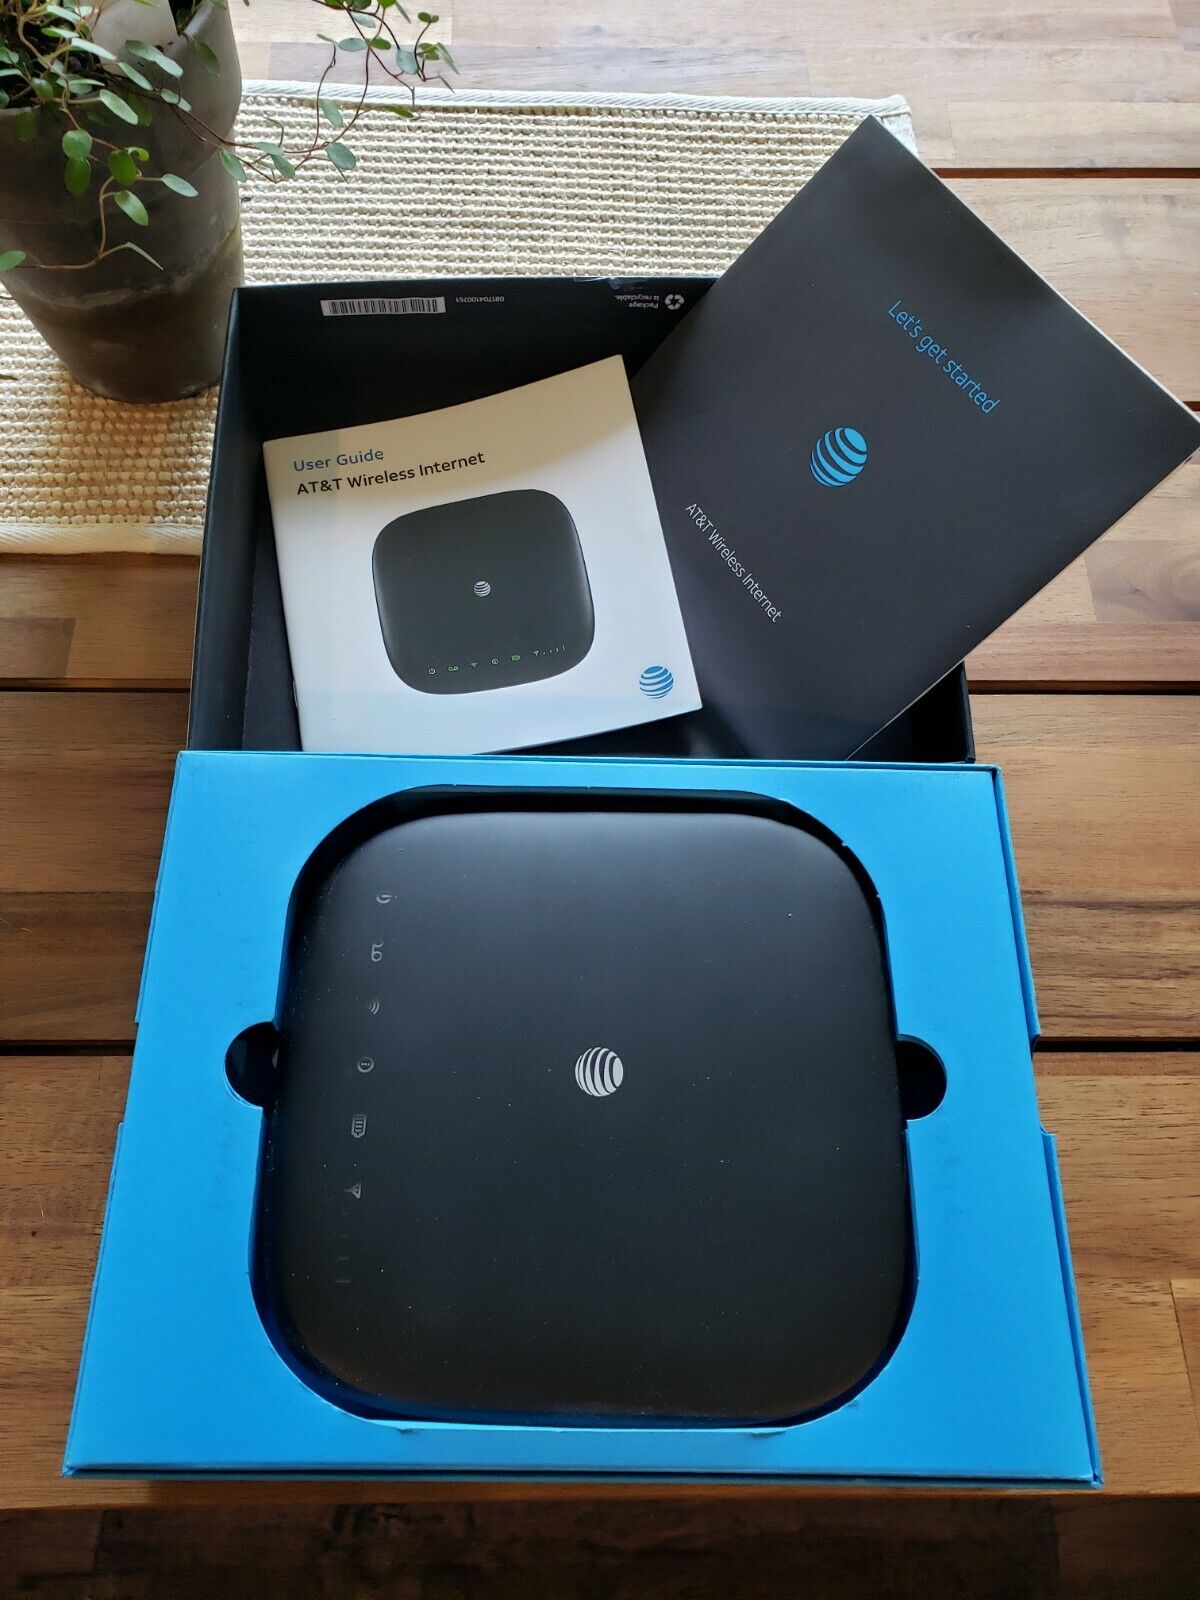 ZTE MF279 Home Wireless Internet Base Router (AT&T)